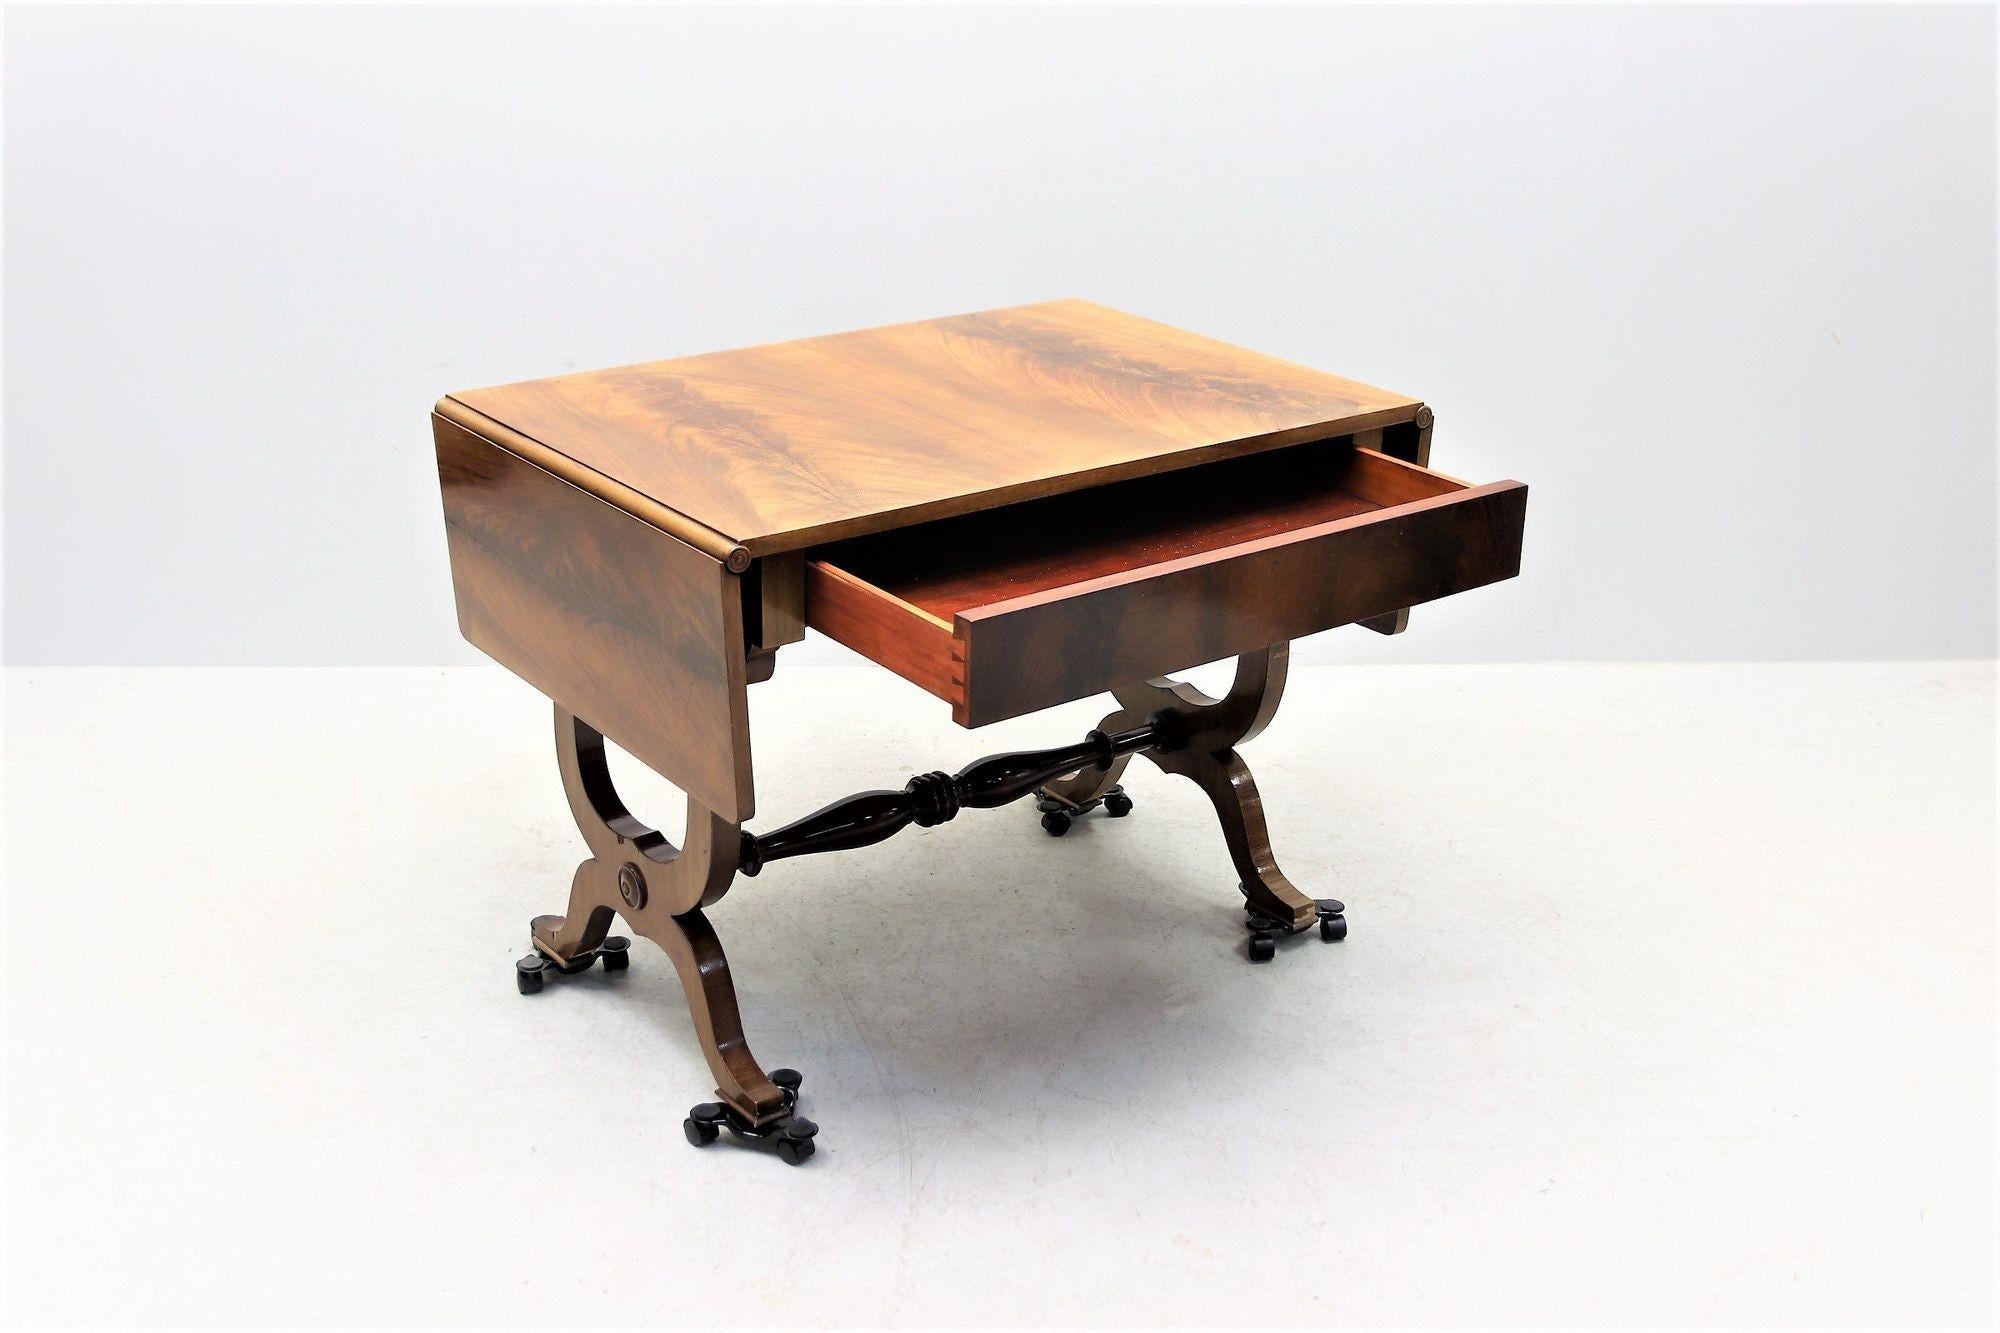 1900s Empire-style desk with gorgeous veneer wood grain detail and graceful carved legs. Dress up a home office or bedroom with this early 1900s empire-style hardwood desk with two collabsible, fold-down leaves. The wood grain detail of the desk top